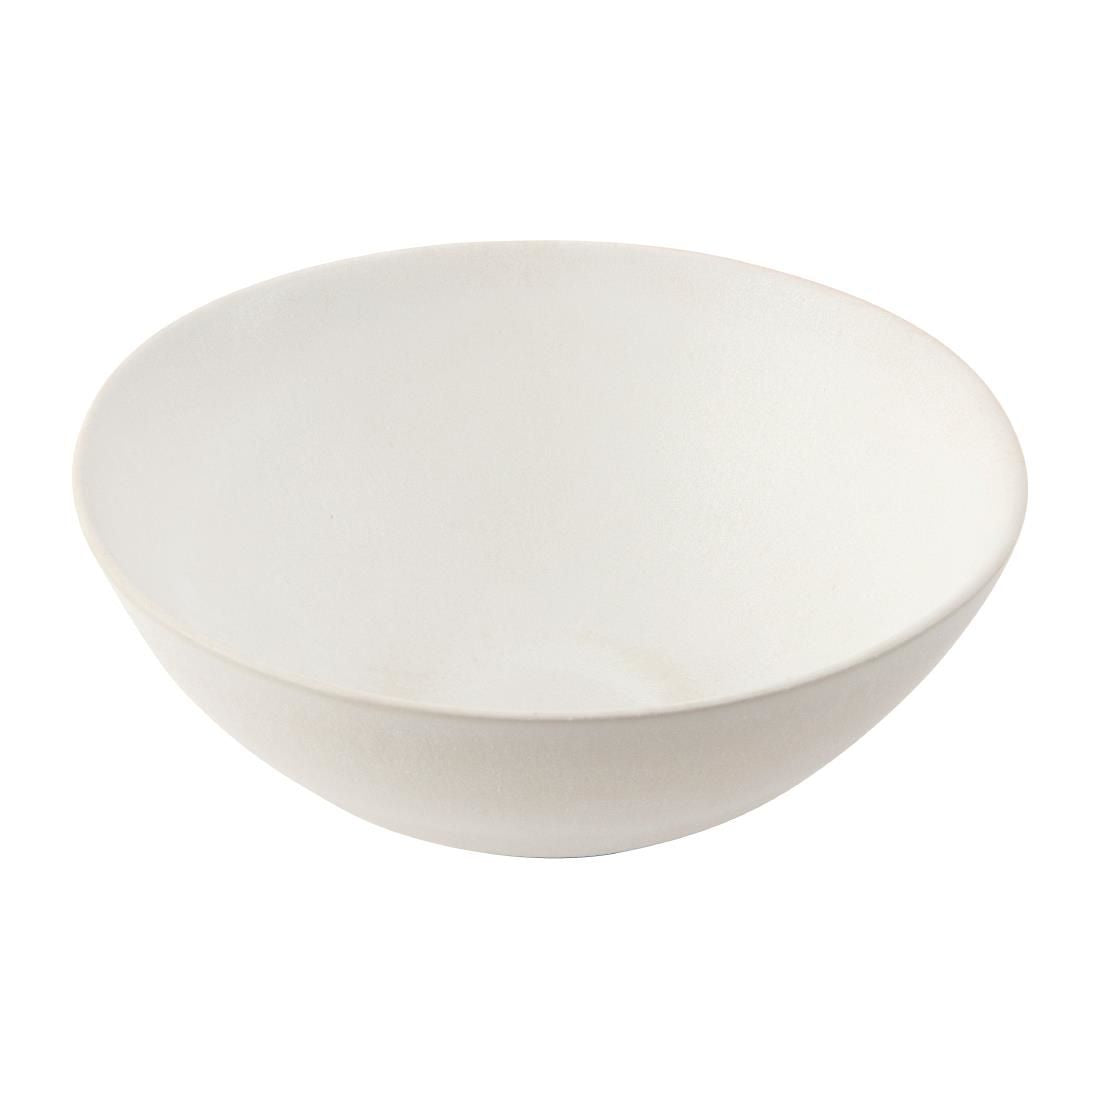 FC702 Olympia Build-a-Bowl White Deep Bowls 225mm (Pack of 4) JD Catering Equipment Solutions Ltd